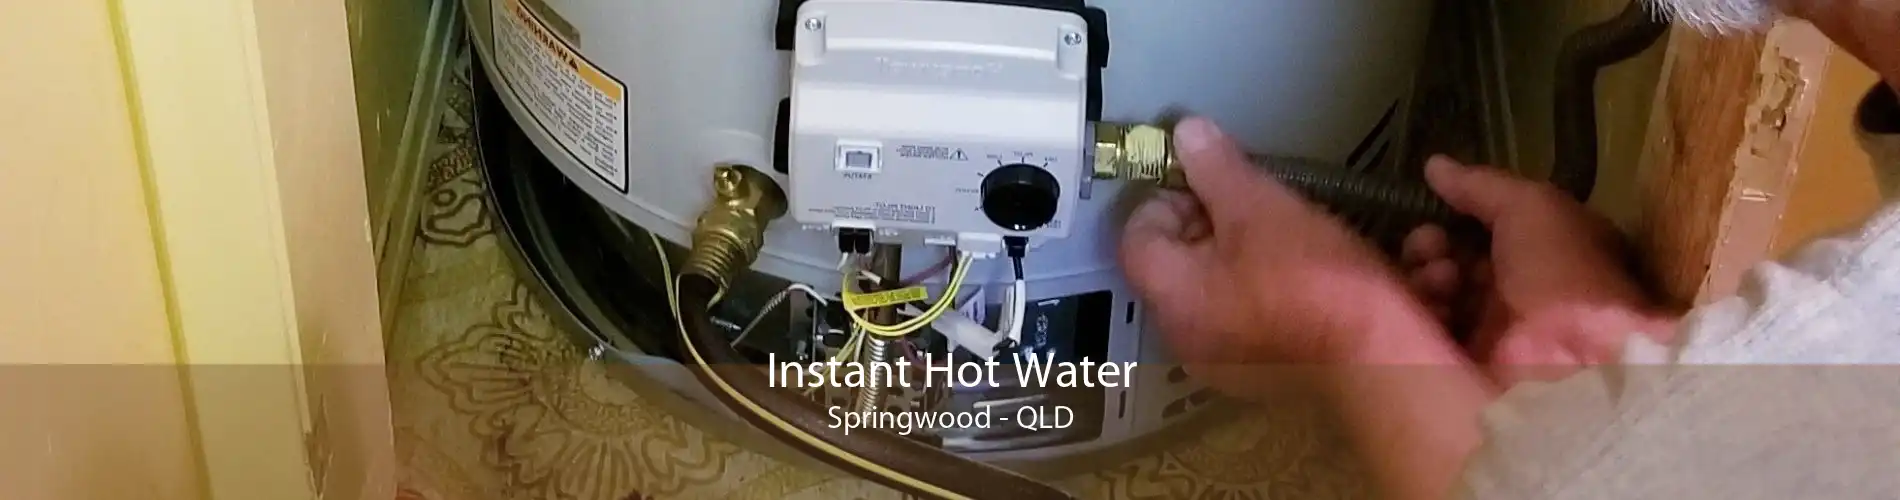 Instant Hot Water Springwood - QLD